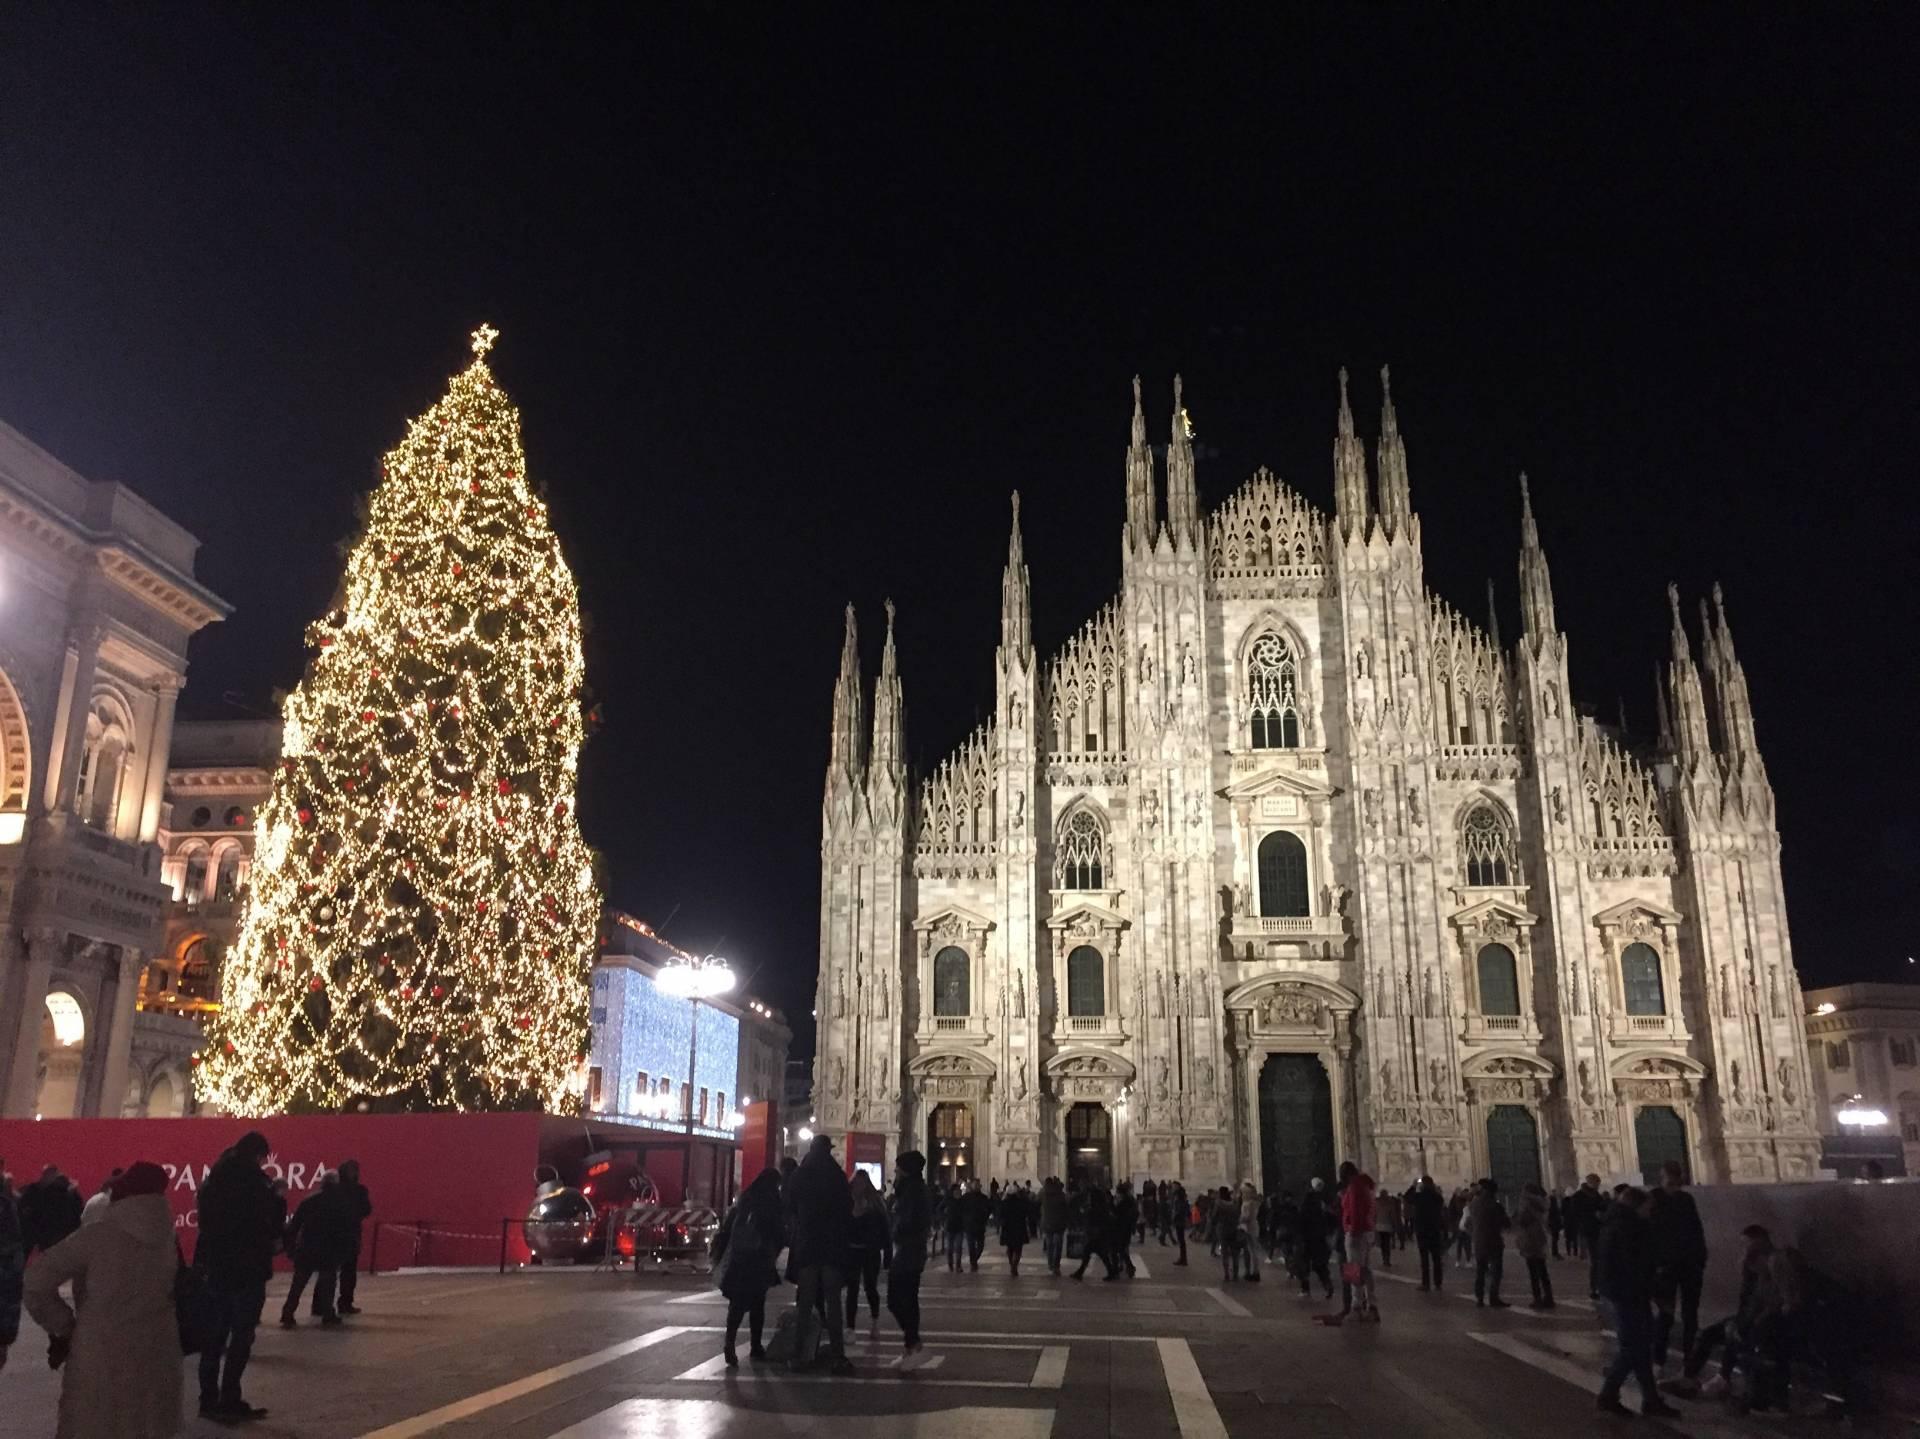 Duomo to Da Vinci: How to Spend 24 Hours in Milan, Italy